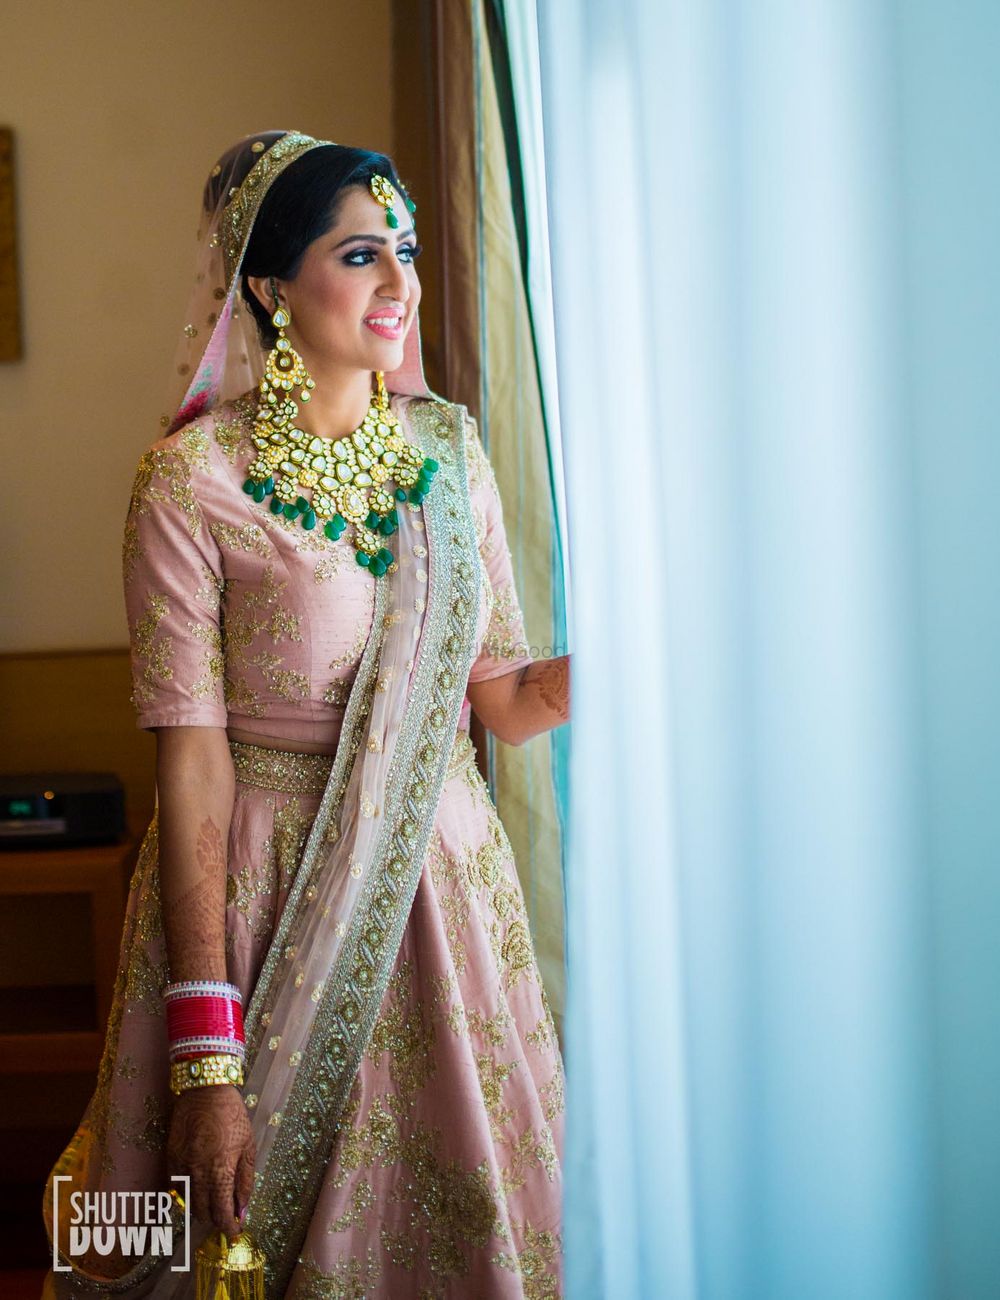 Photo of Bride looking out of window in pink lehenga with green jewellery